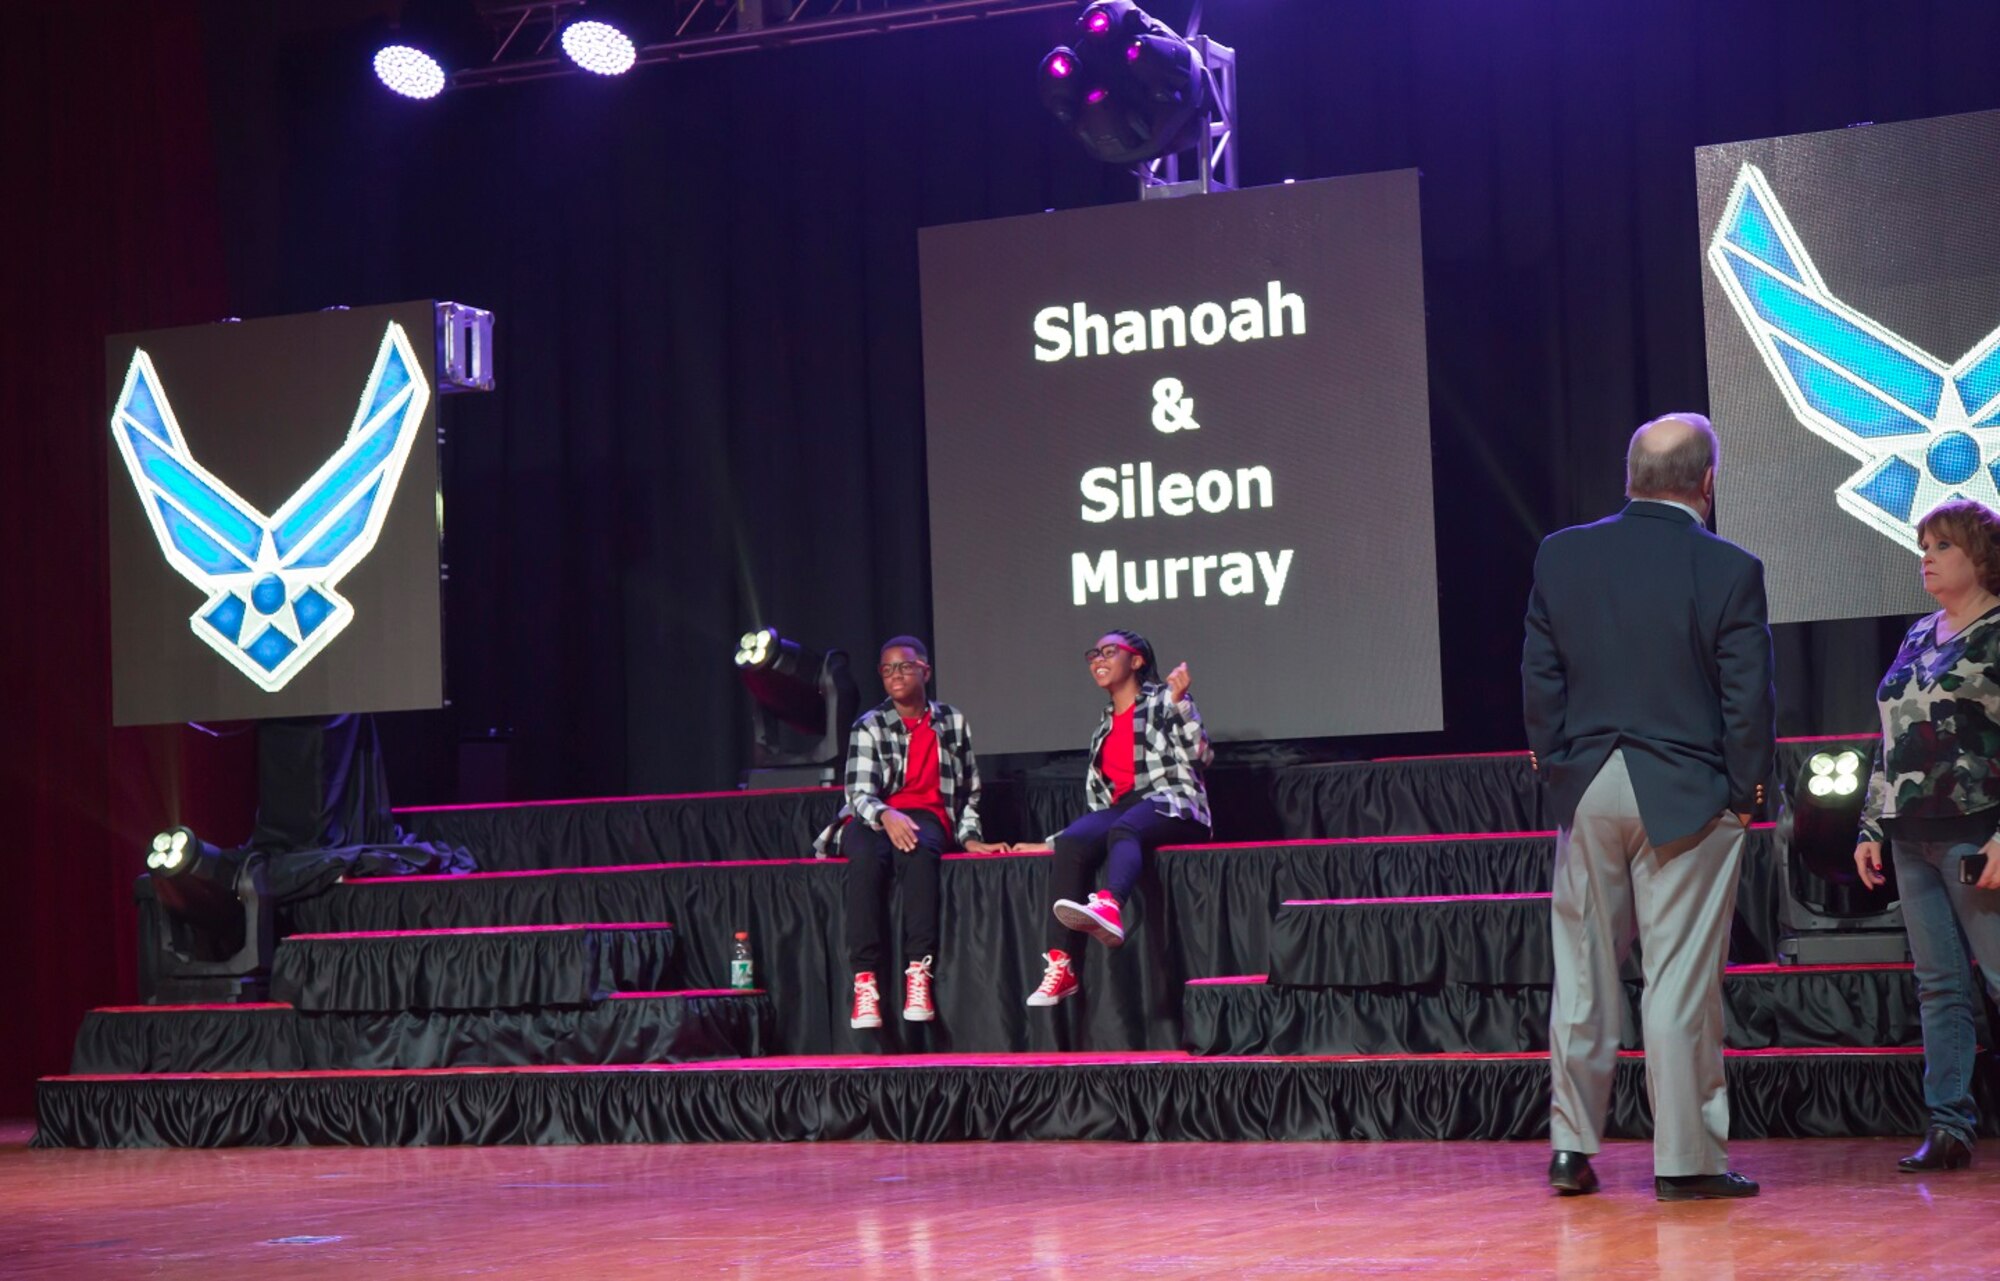 Shanoah and Sileon Murray, a sister and brother dance act whose parents are stationed at Hill Air Force Base, Utah, won the Operation Talent Search competition. (U.S. Air Force photo by Lee Schwabe)